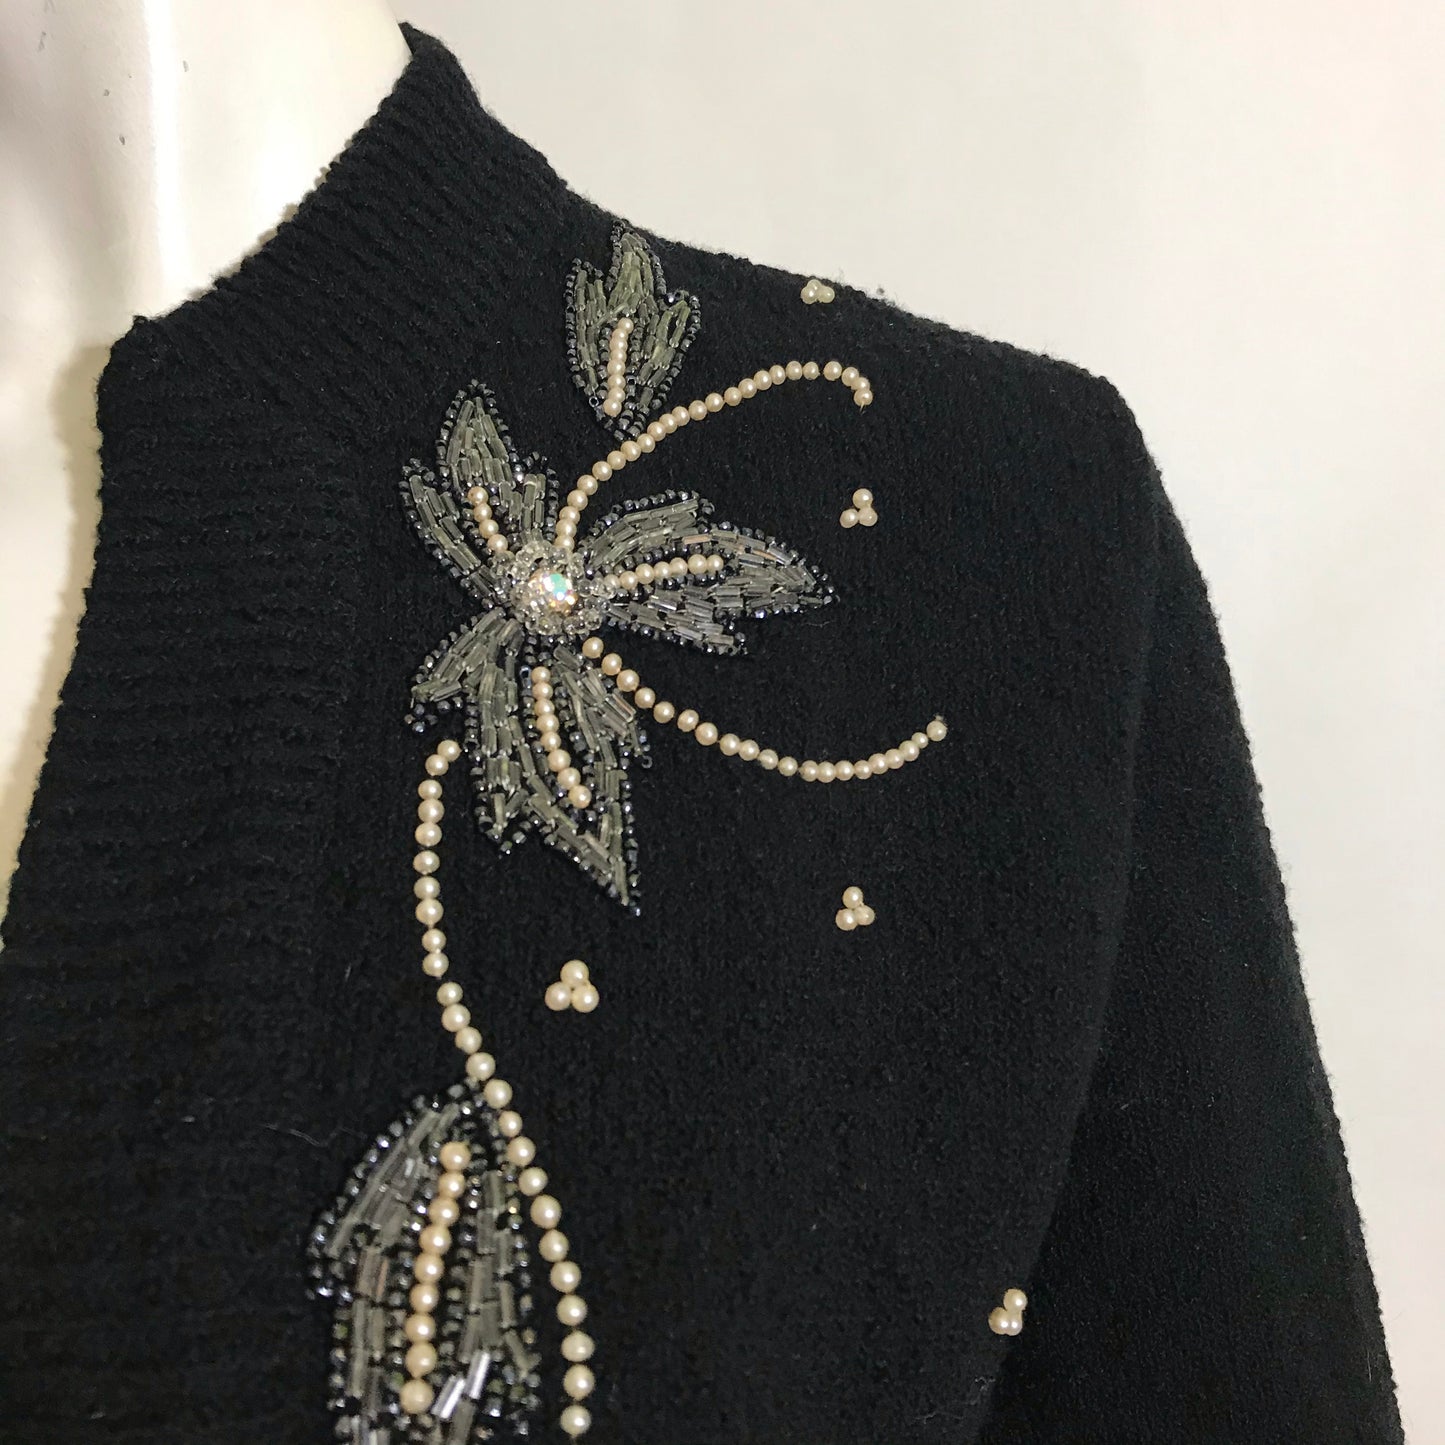 Black Knit Open Front Beaded Cardigan with Rhinestones circa 1940s